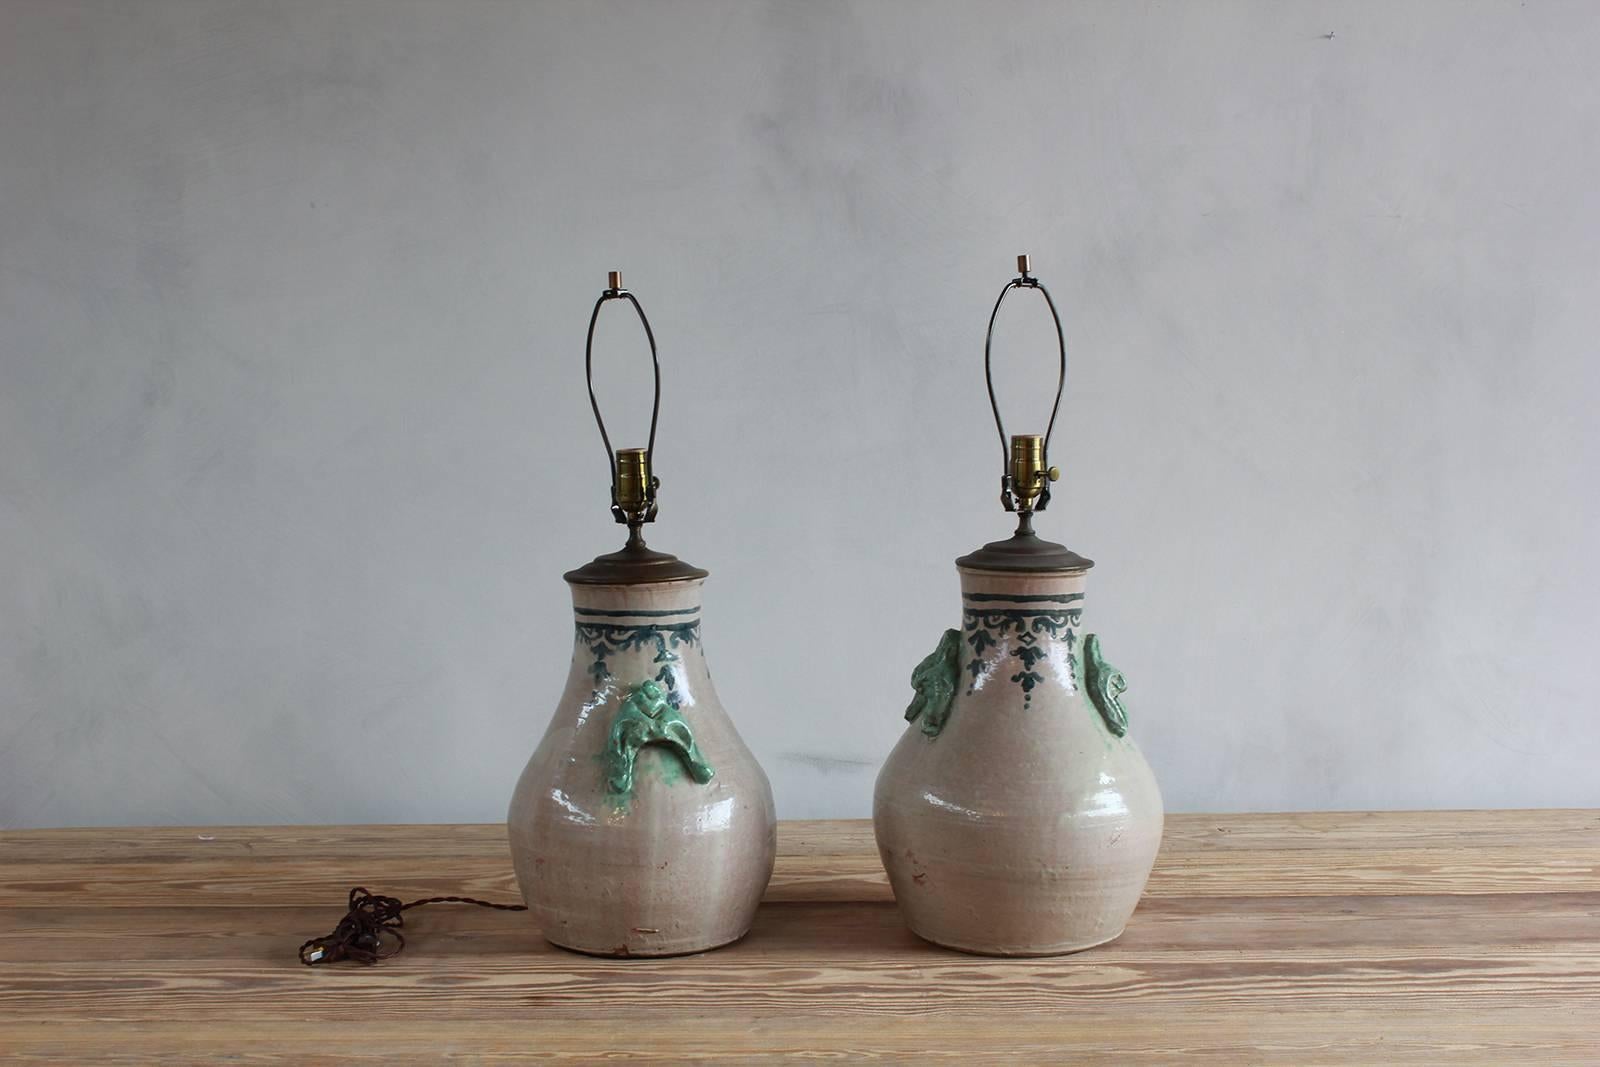 Pair of ceramic lamps with celadon glazed embellishments and blue details.